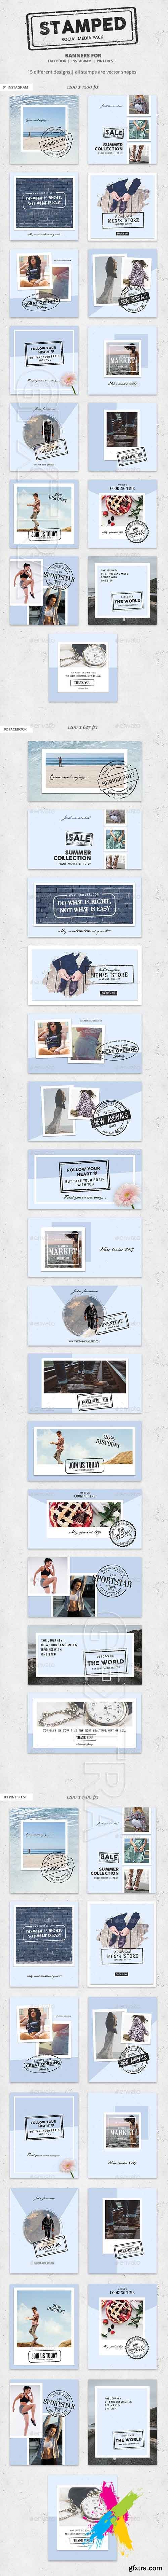 Graphicriver - Stamped - Social Media Pack 20171409